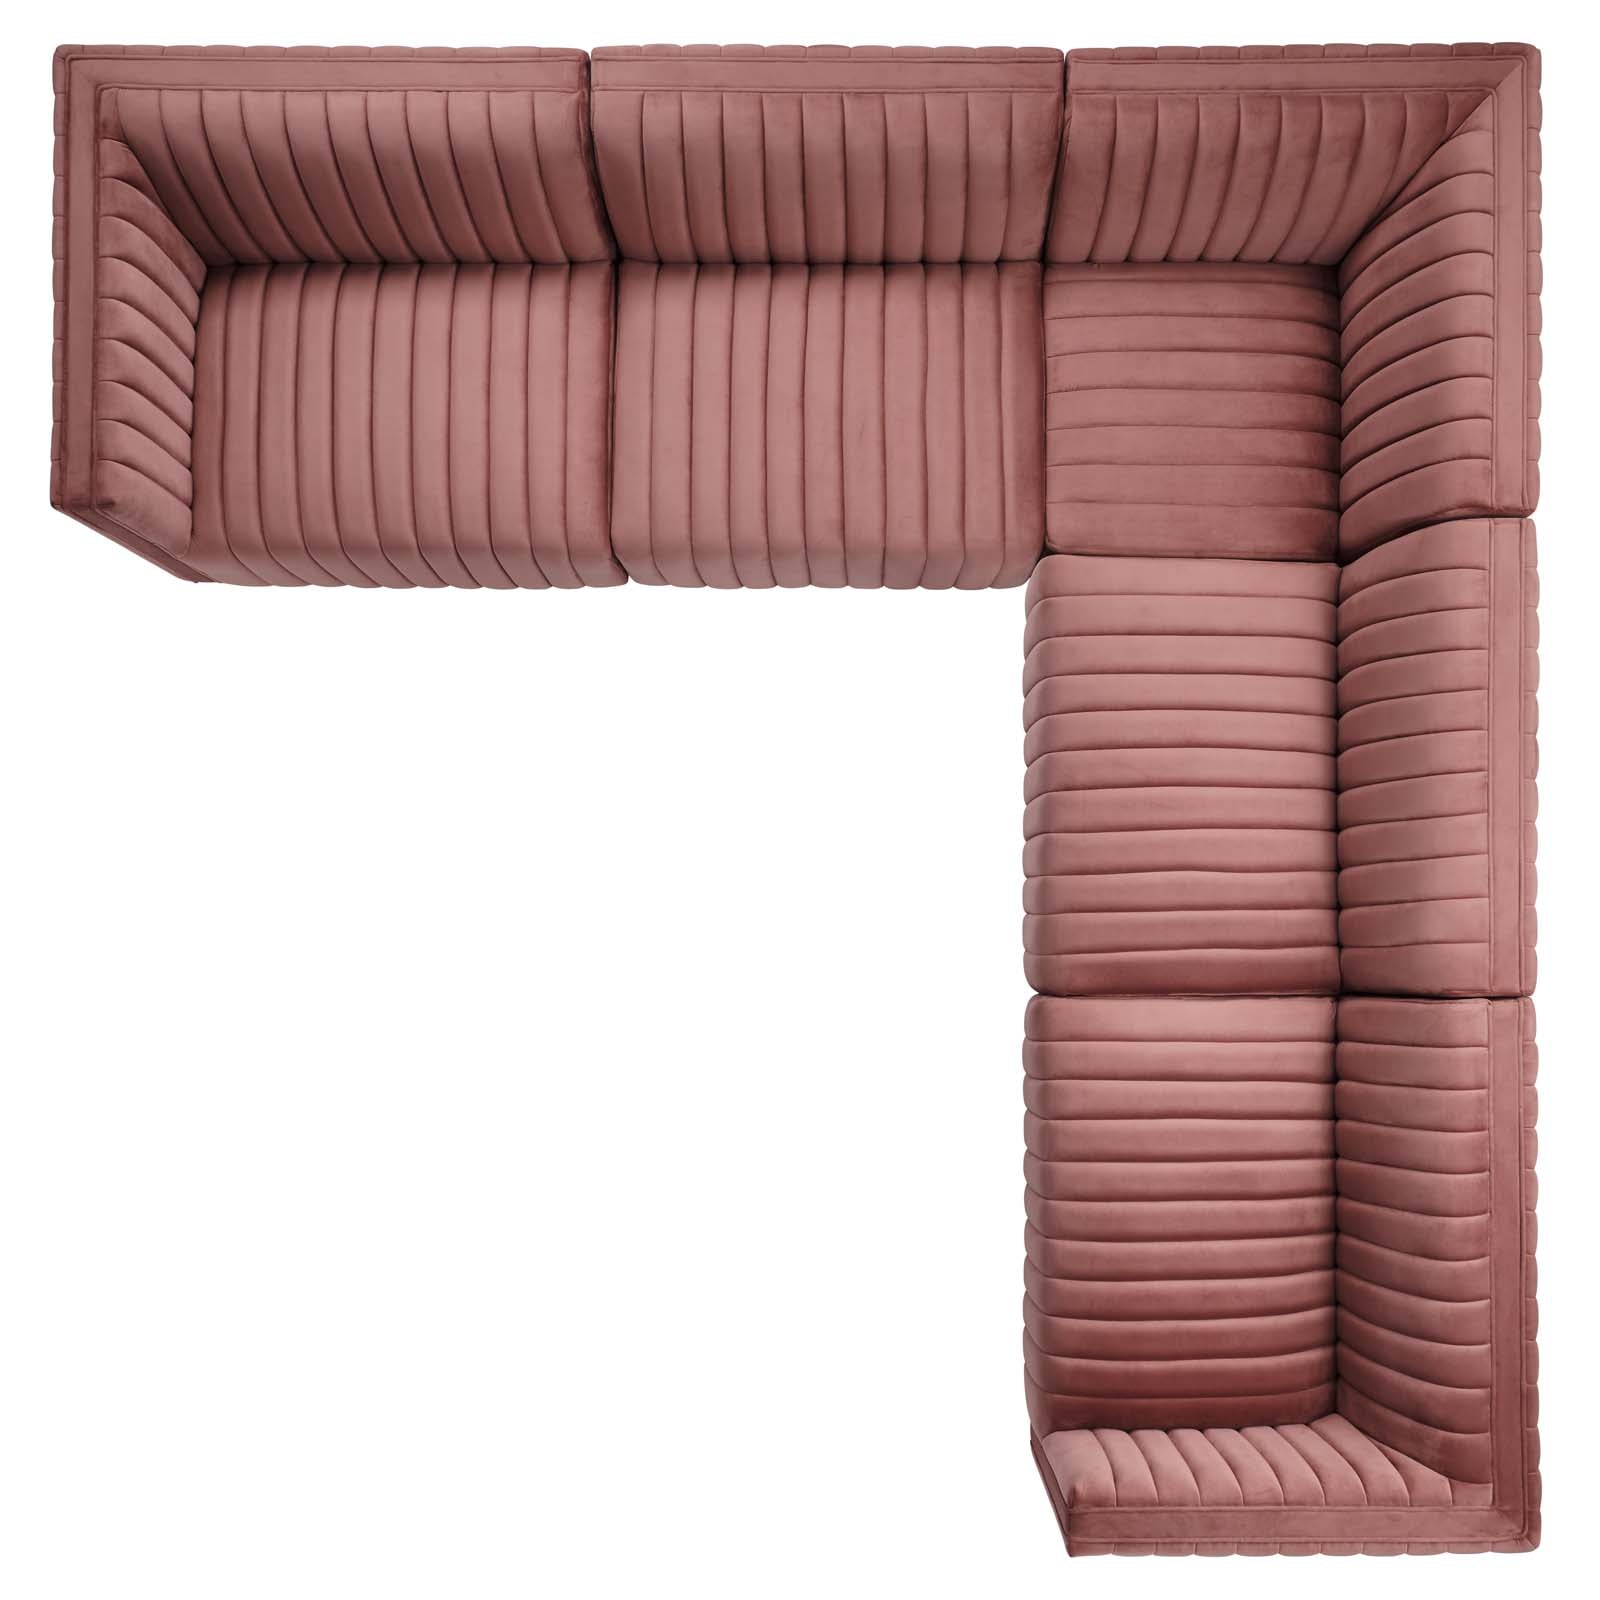 Modway Sectional Sofas - Conjure Channel Tufted Performance Velvet 5 Piece Sectional Gold | Dusty Rose